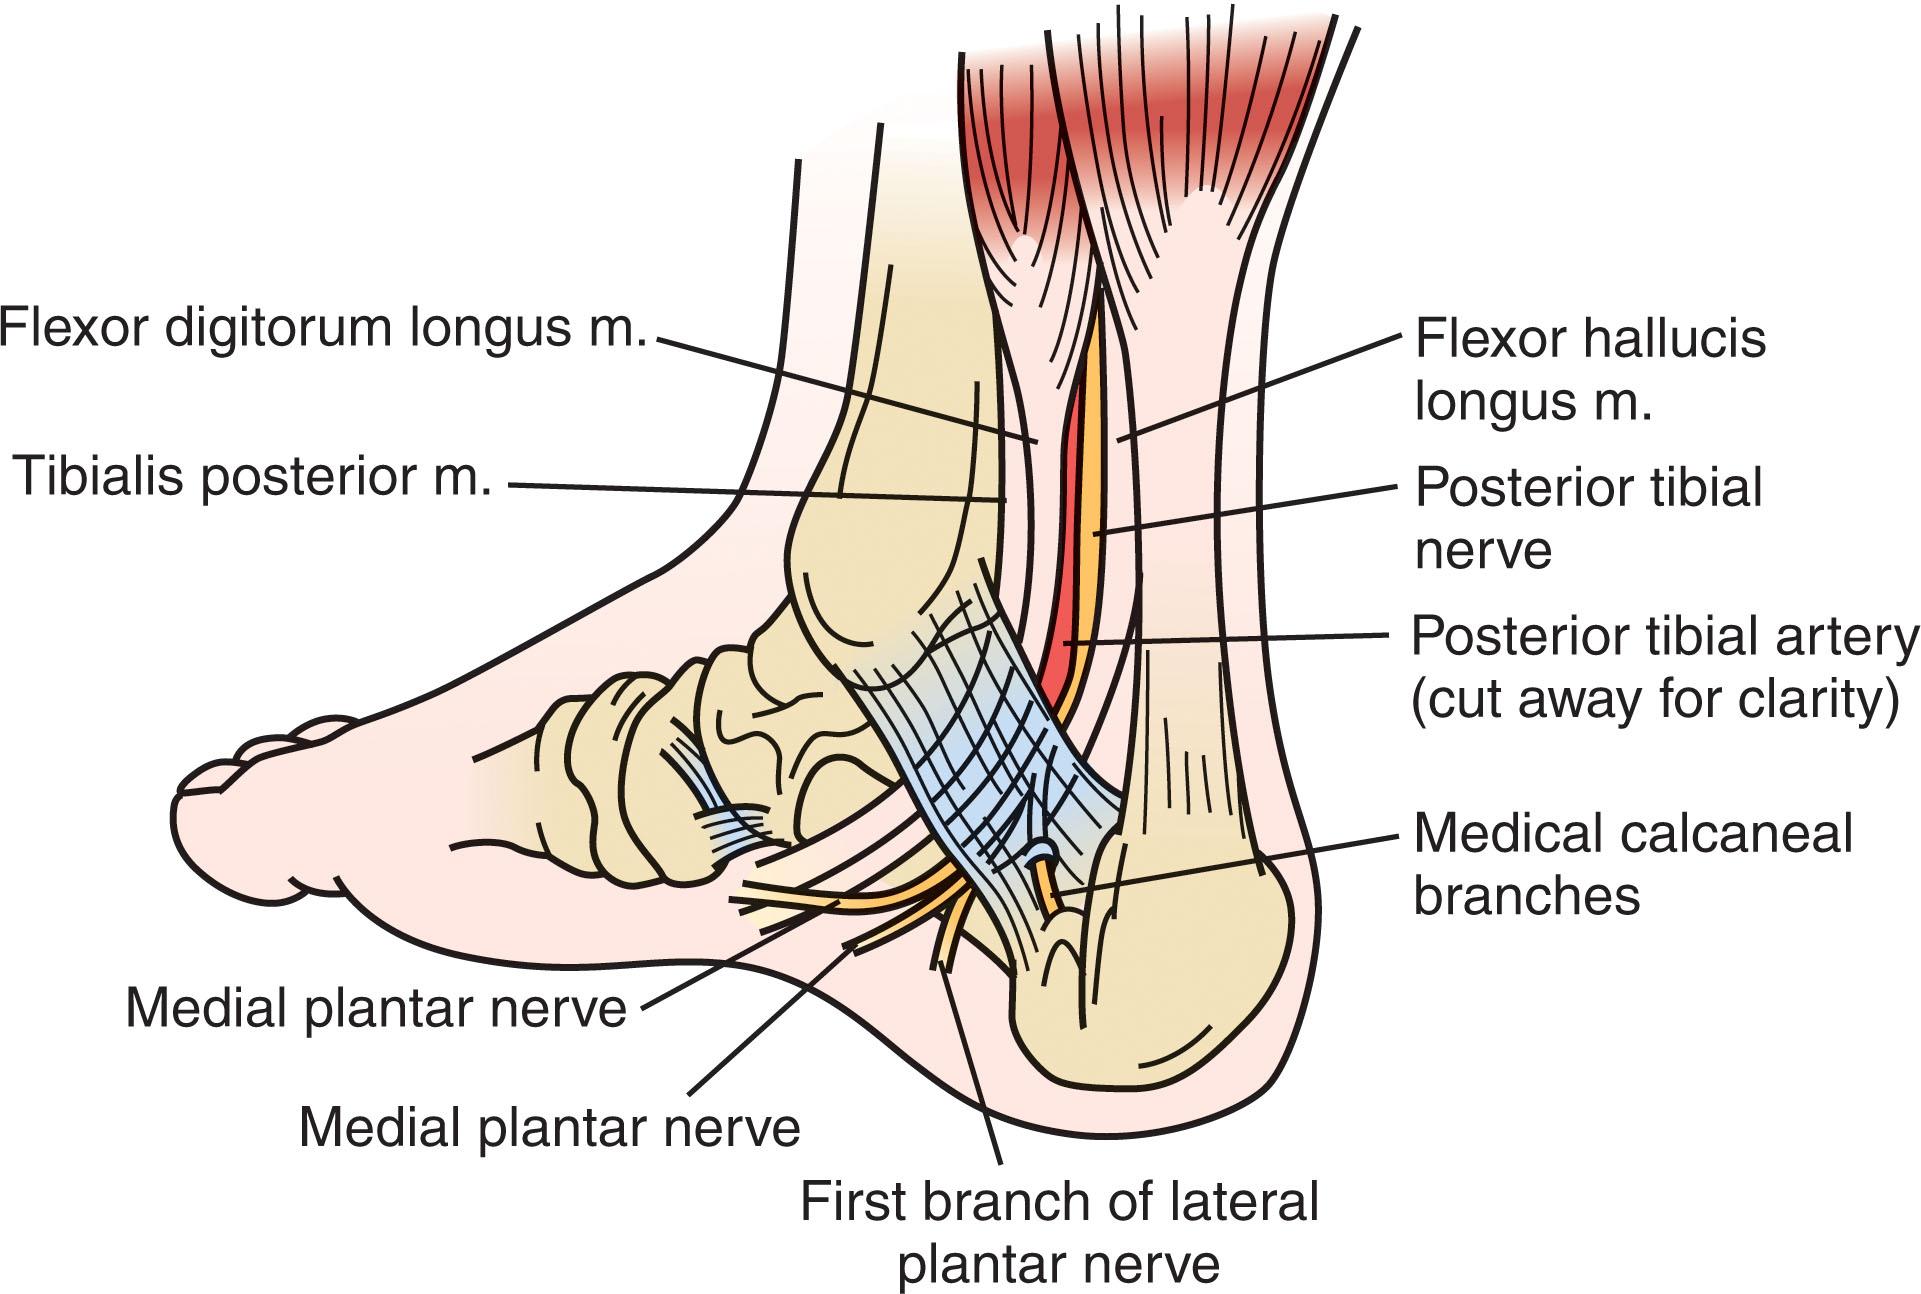 Fig. 12-2, Illustration of the medial hindfoot anatomy showing the tibial nerve and its divisions.